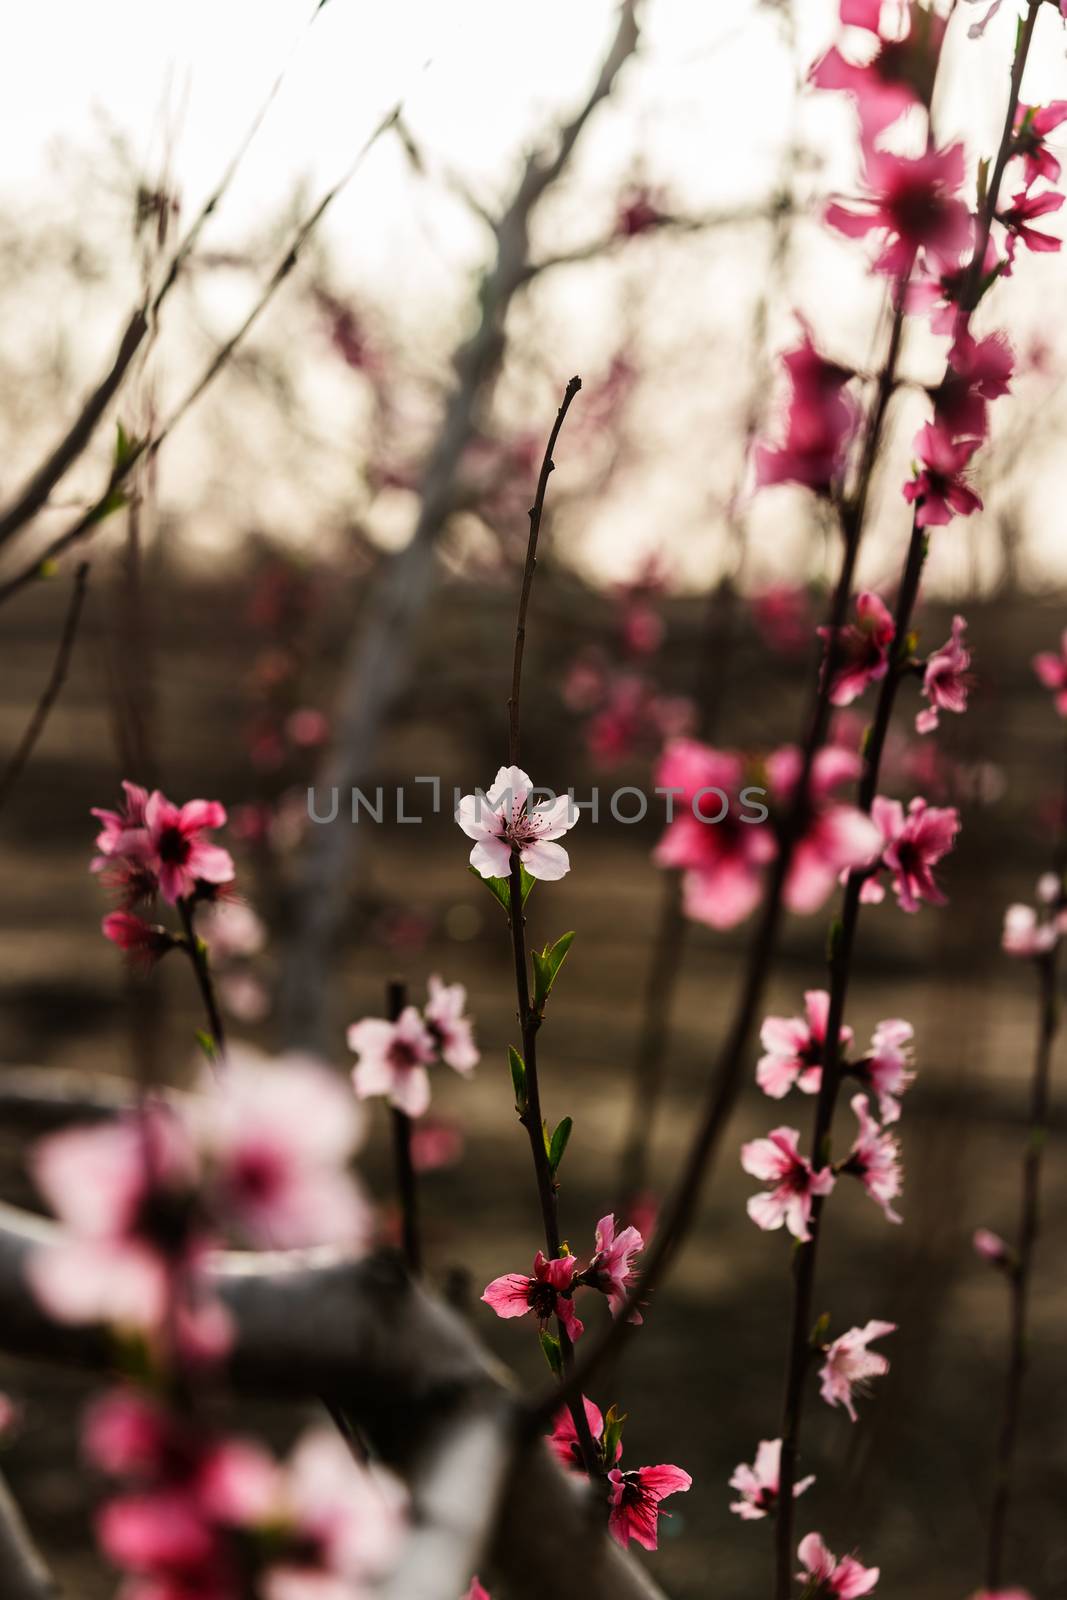 rural landscape, blooming peach garden, agricultural industry